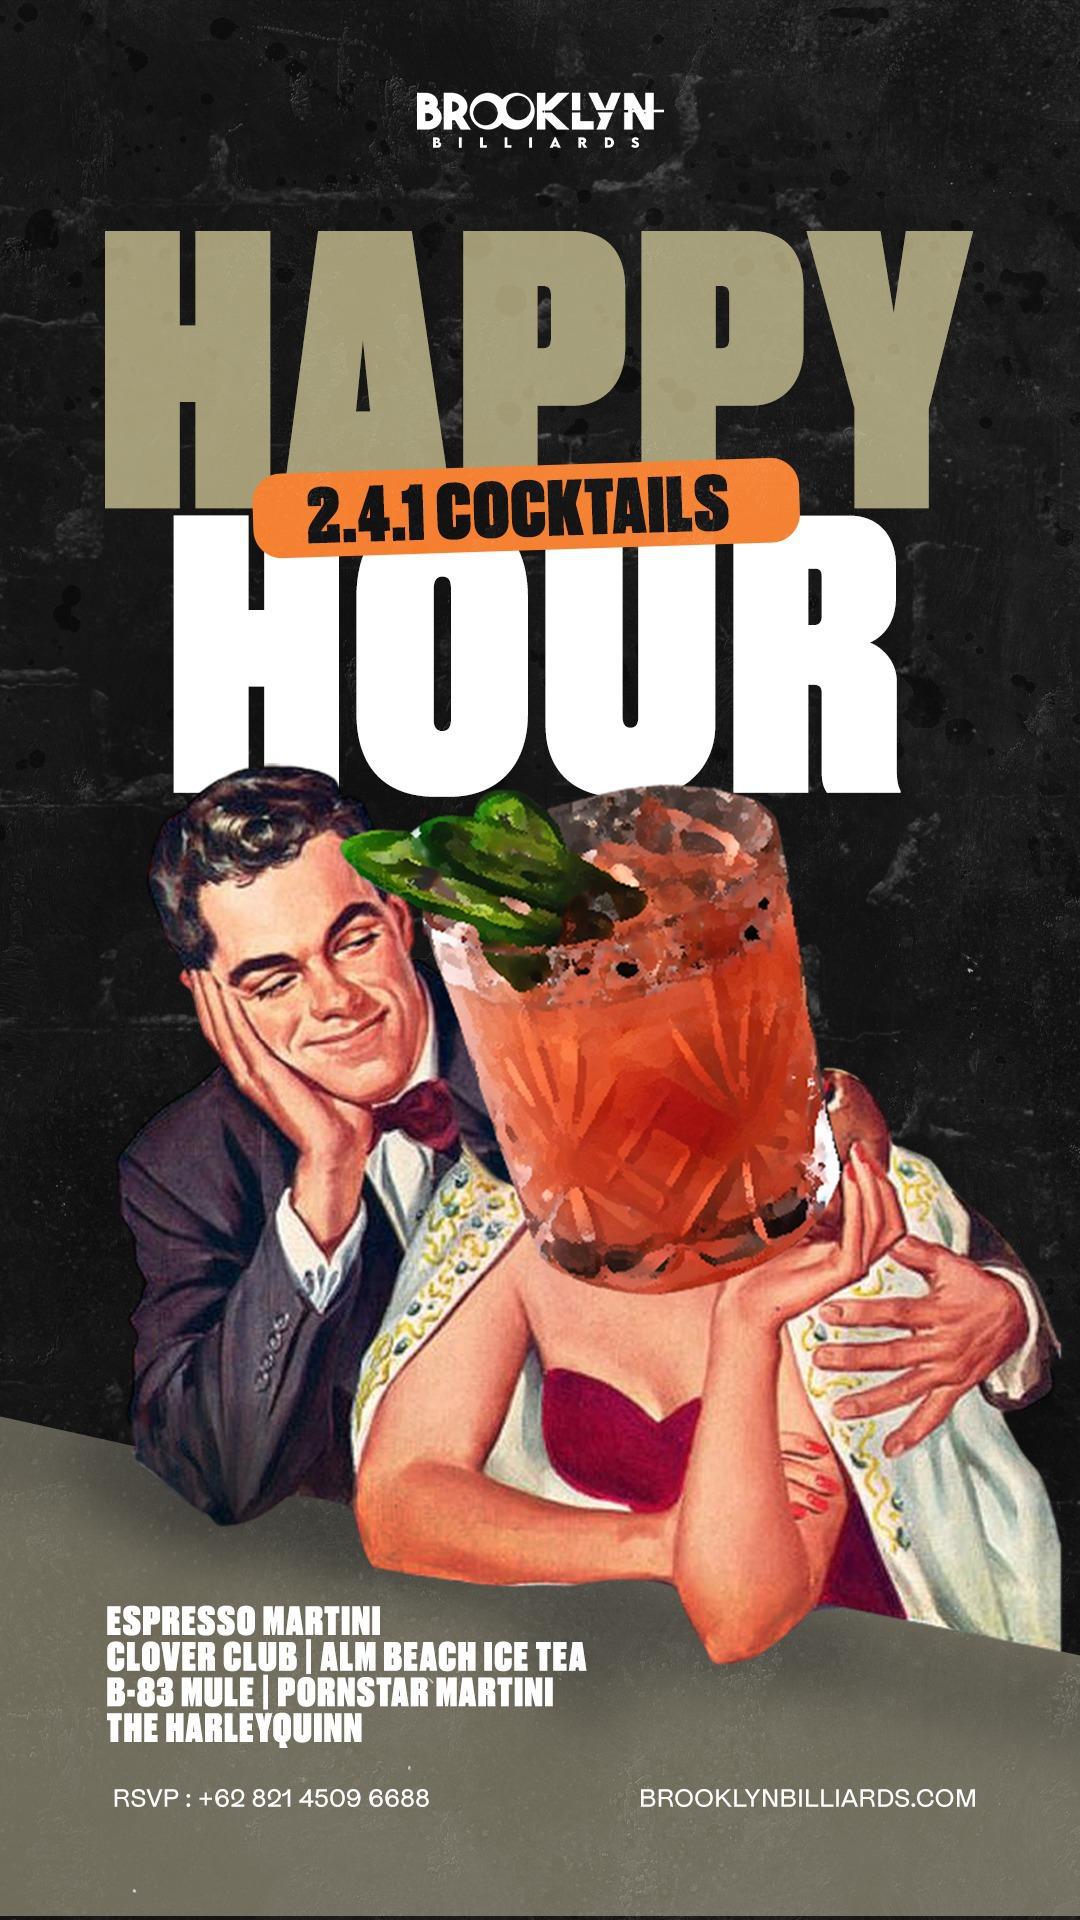 Happy Hour 2.4.1 Cocktails at Brooklyn Billiards 5-7pm